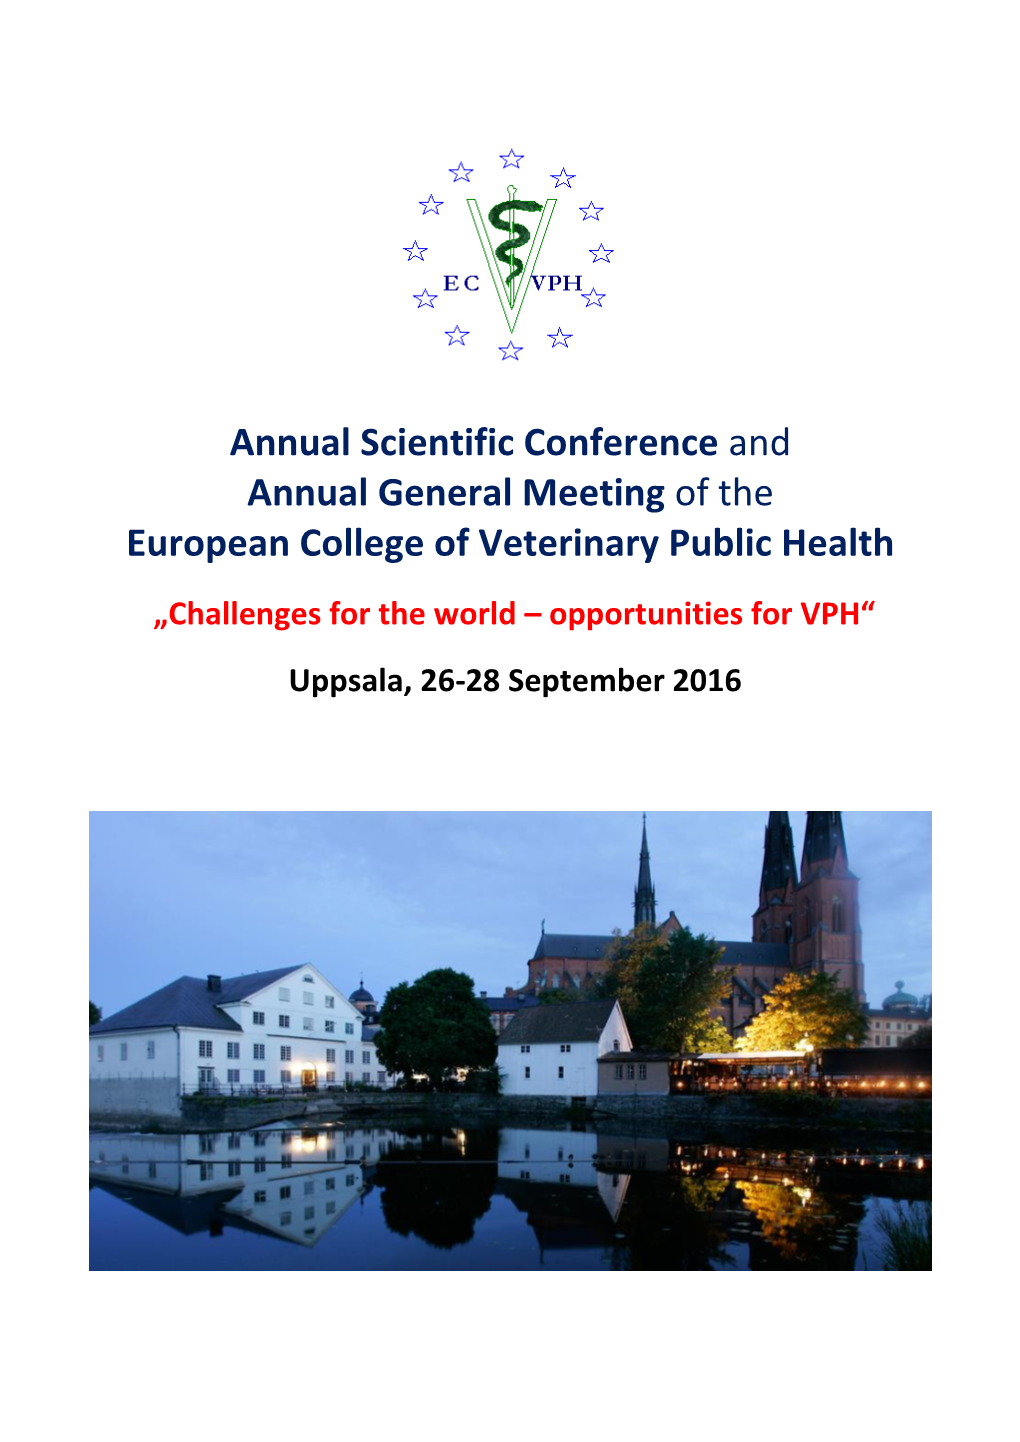 Annual Scientific Conference and Annual General Meeting of the European College of Veterinary Public Health